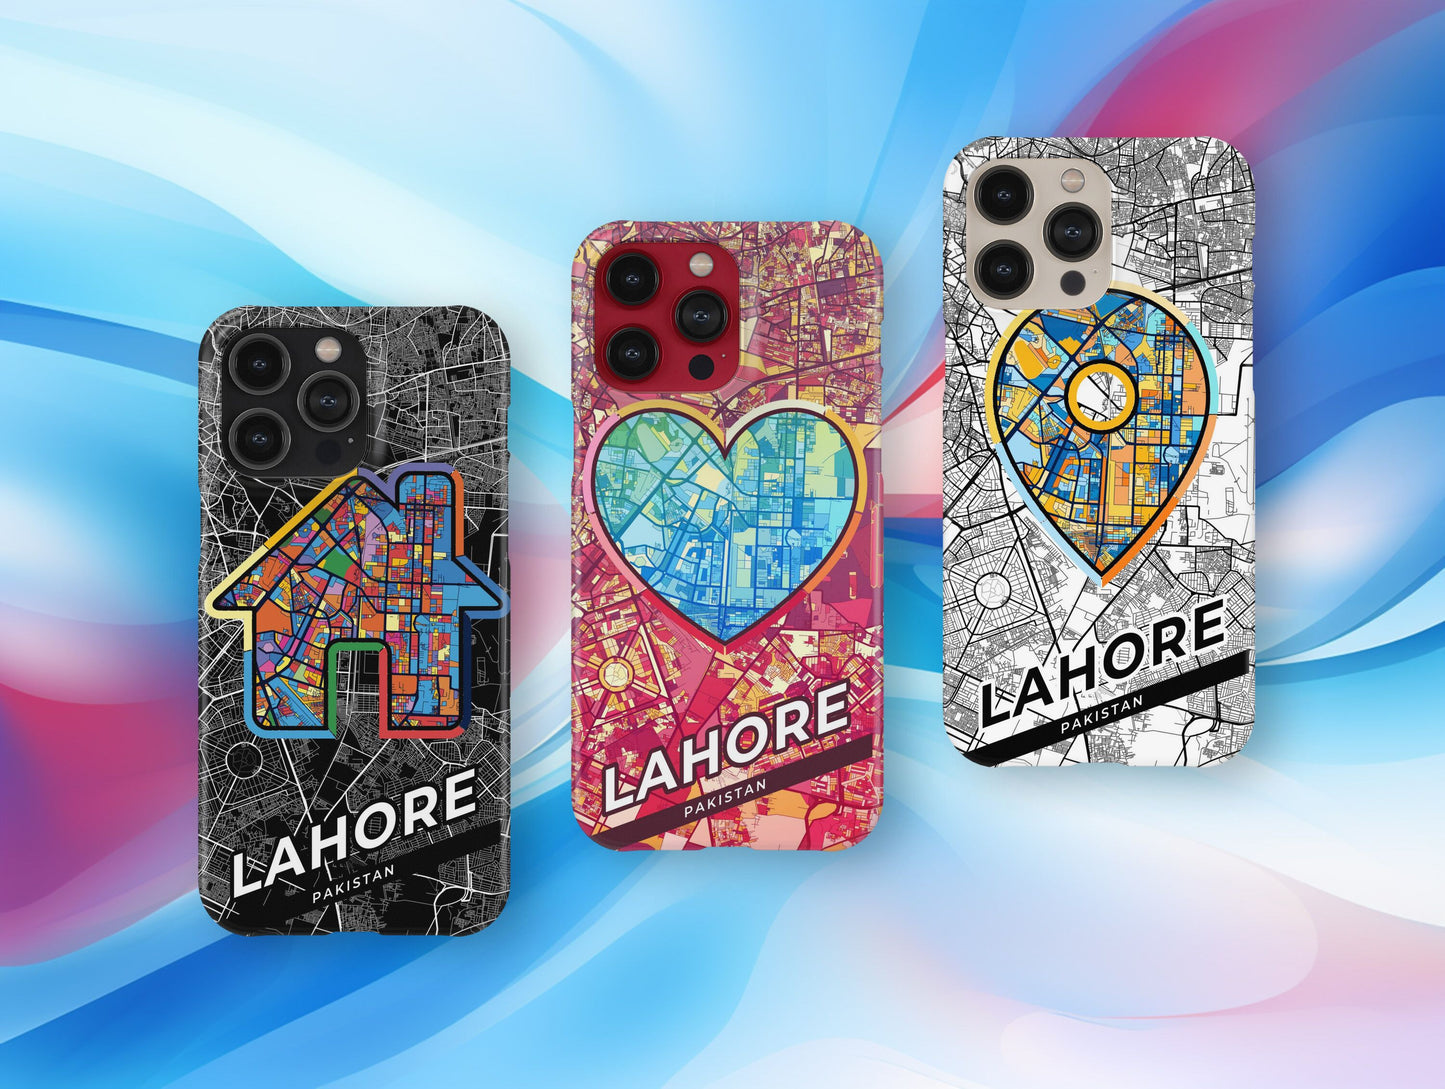 Lahore Pakistan slim phone case with colorful icon. Birthday, wedding or housewarming gift. Couple match cases.